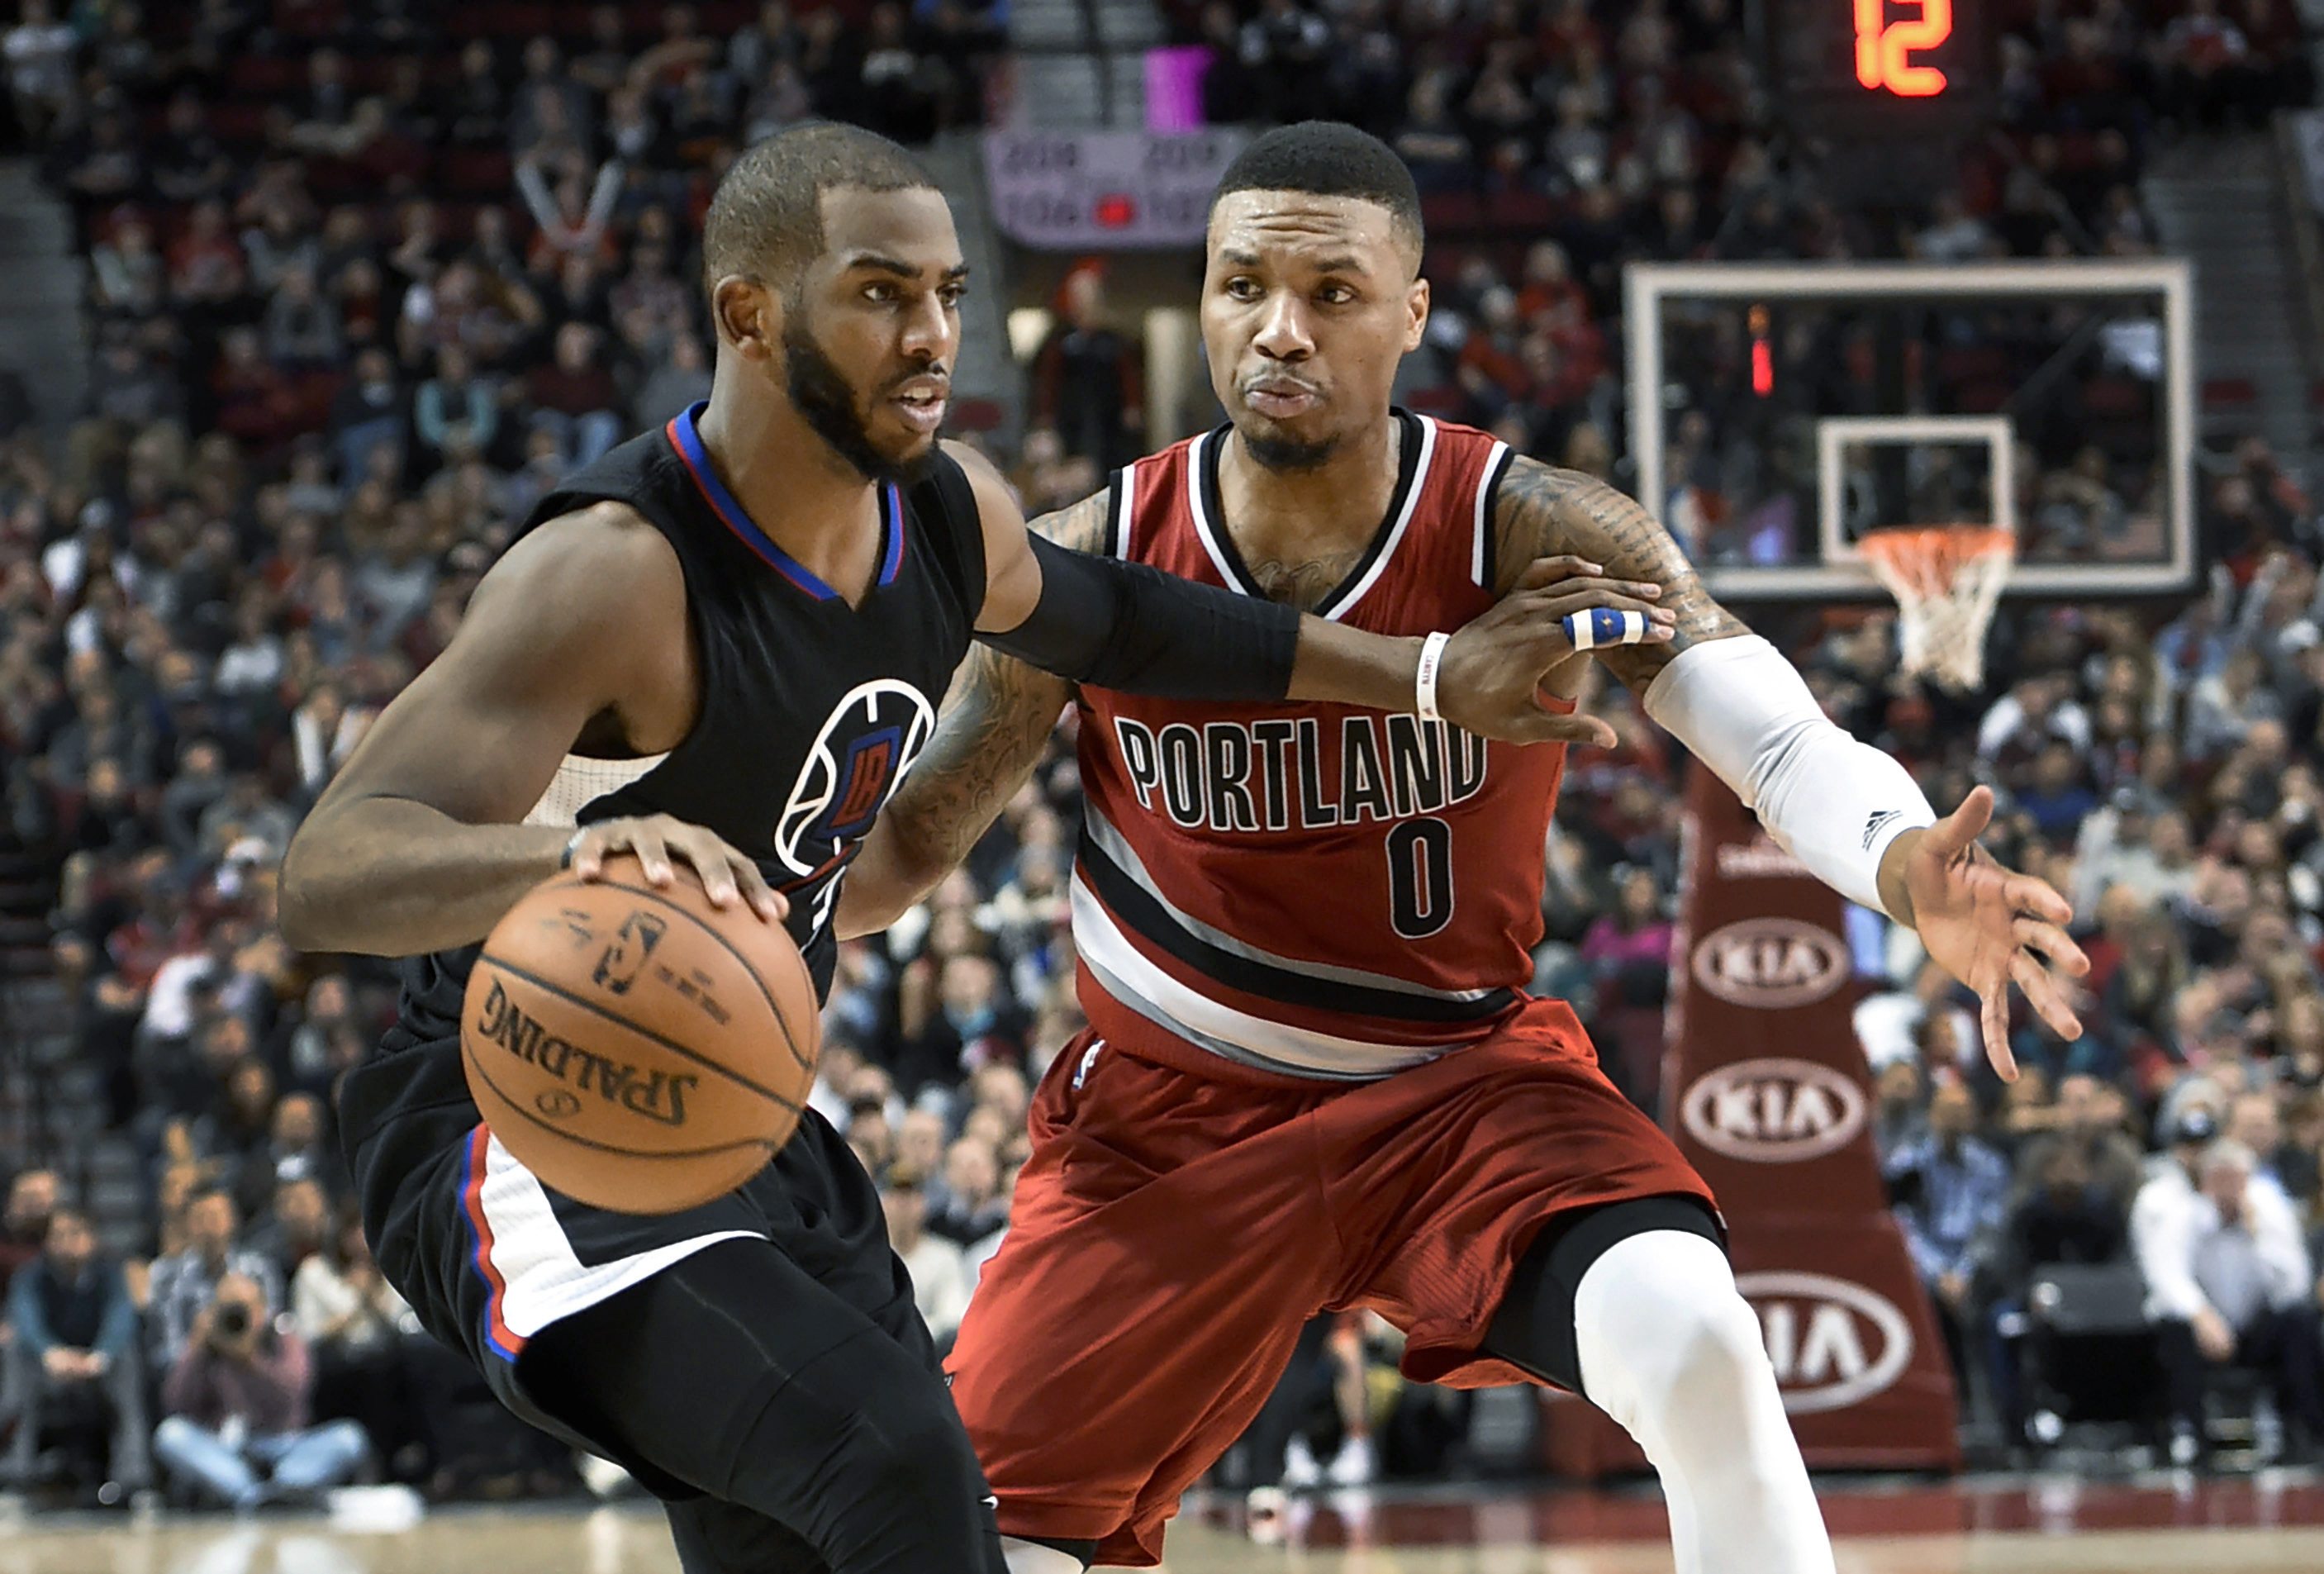 A key matchup of the Blazers-Clippers series will be between the Clippers’ Chris Paul (left) and Blazers’ Damian Lillard.